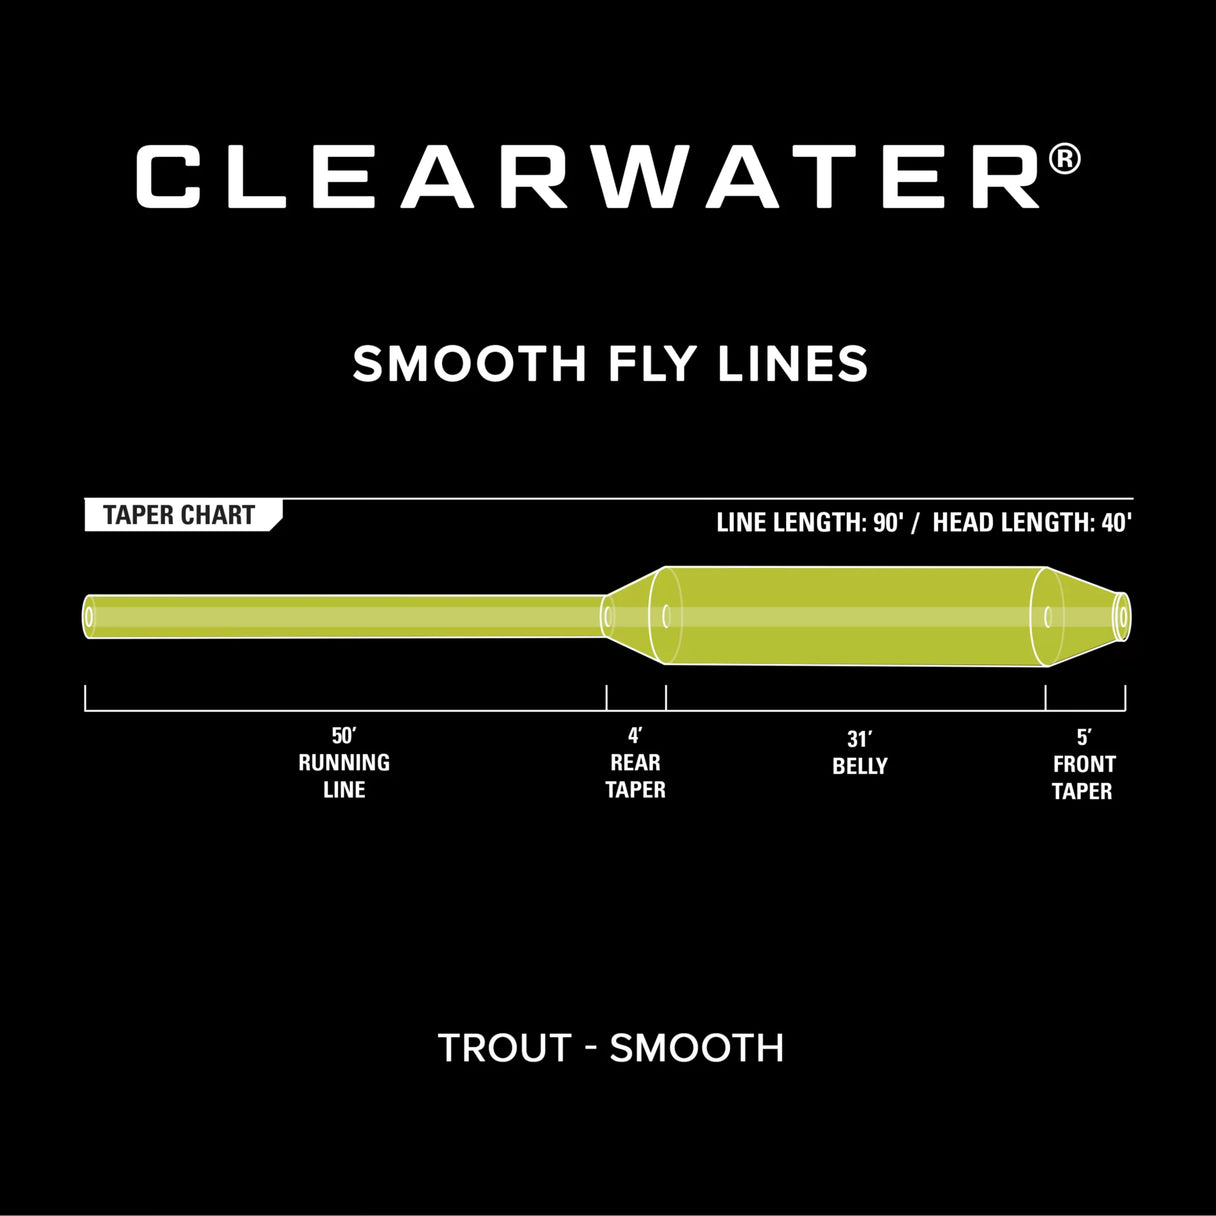 Orvis Clearwater Trout Fly Line